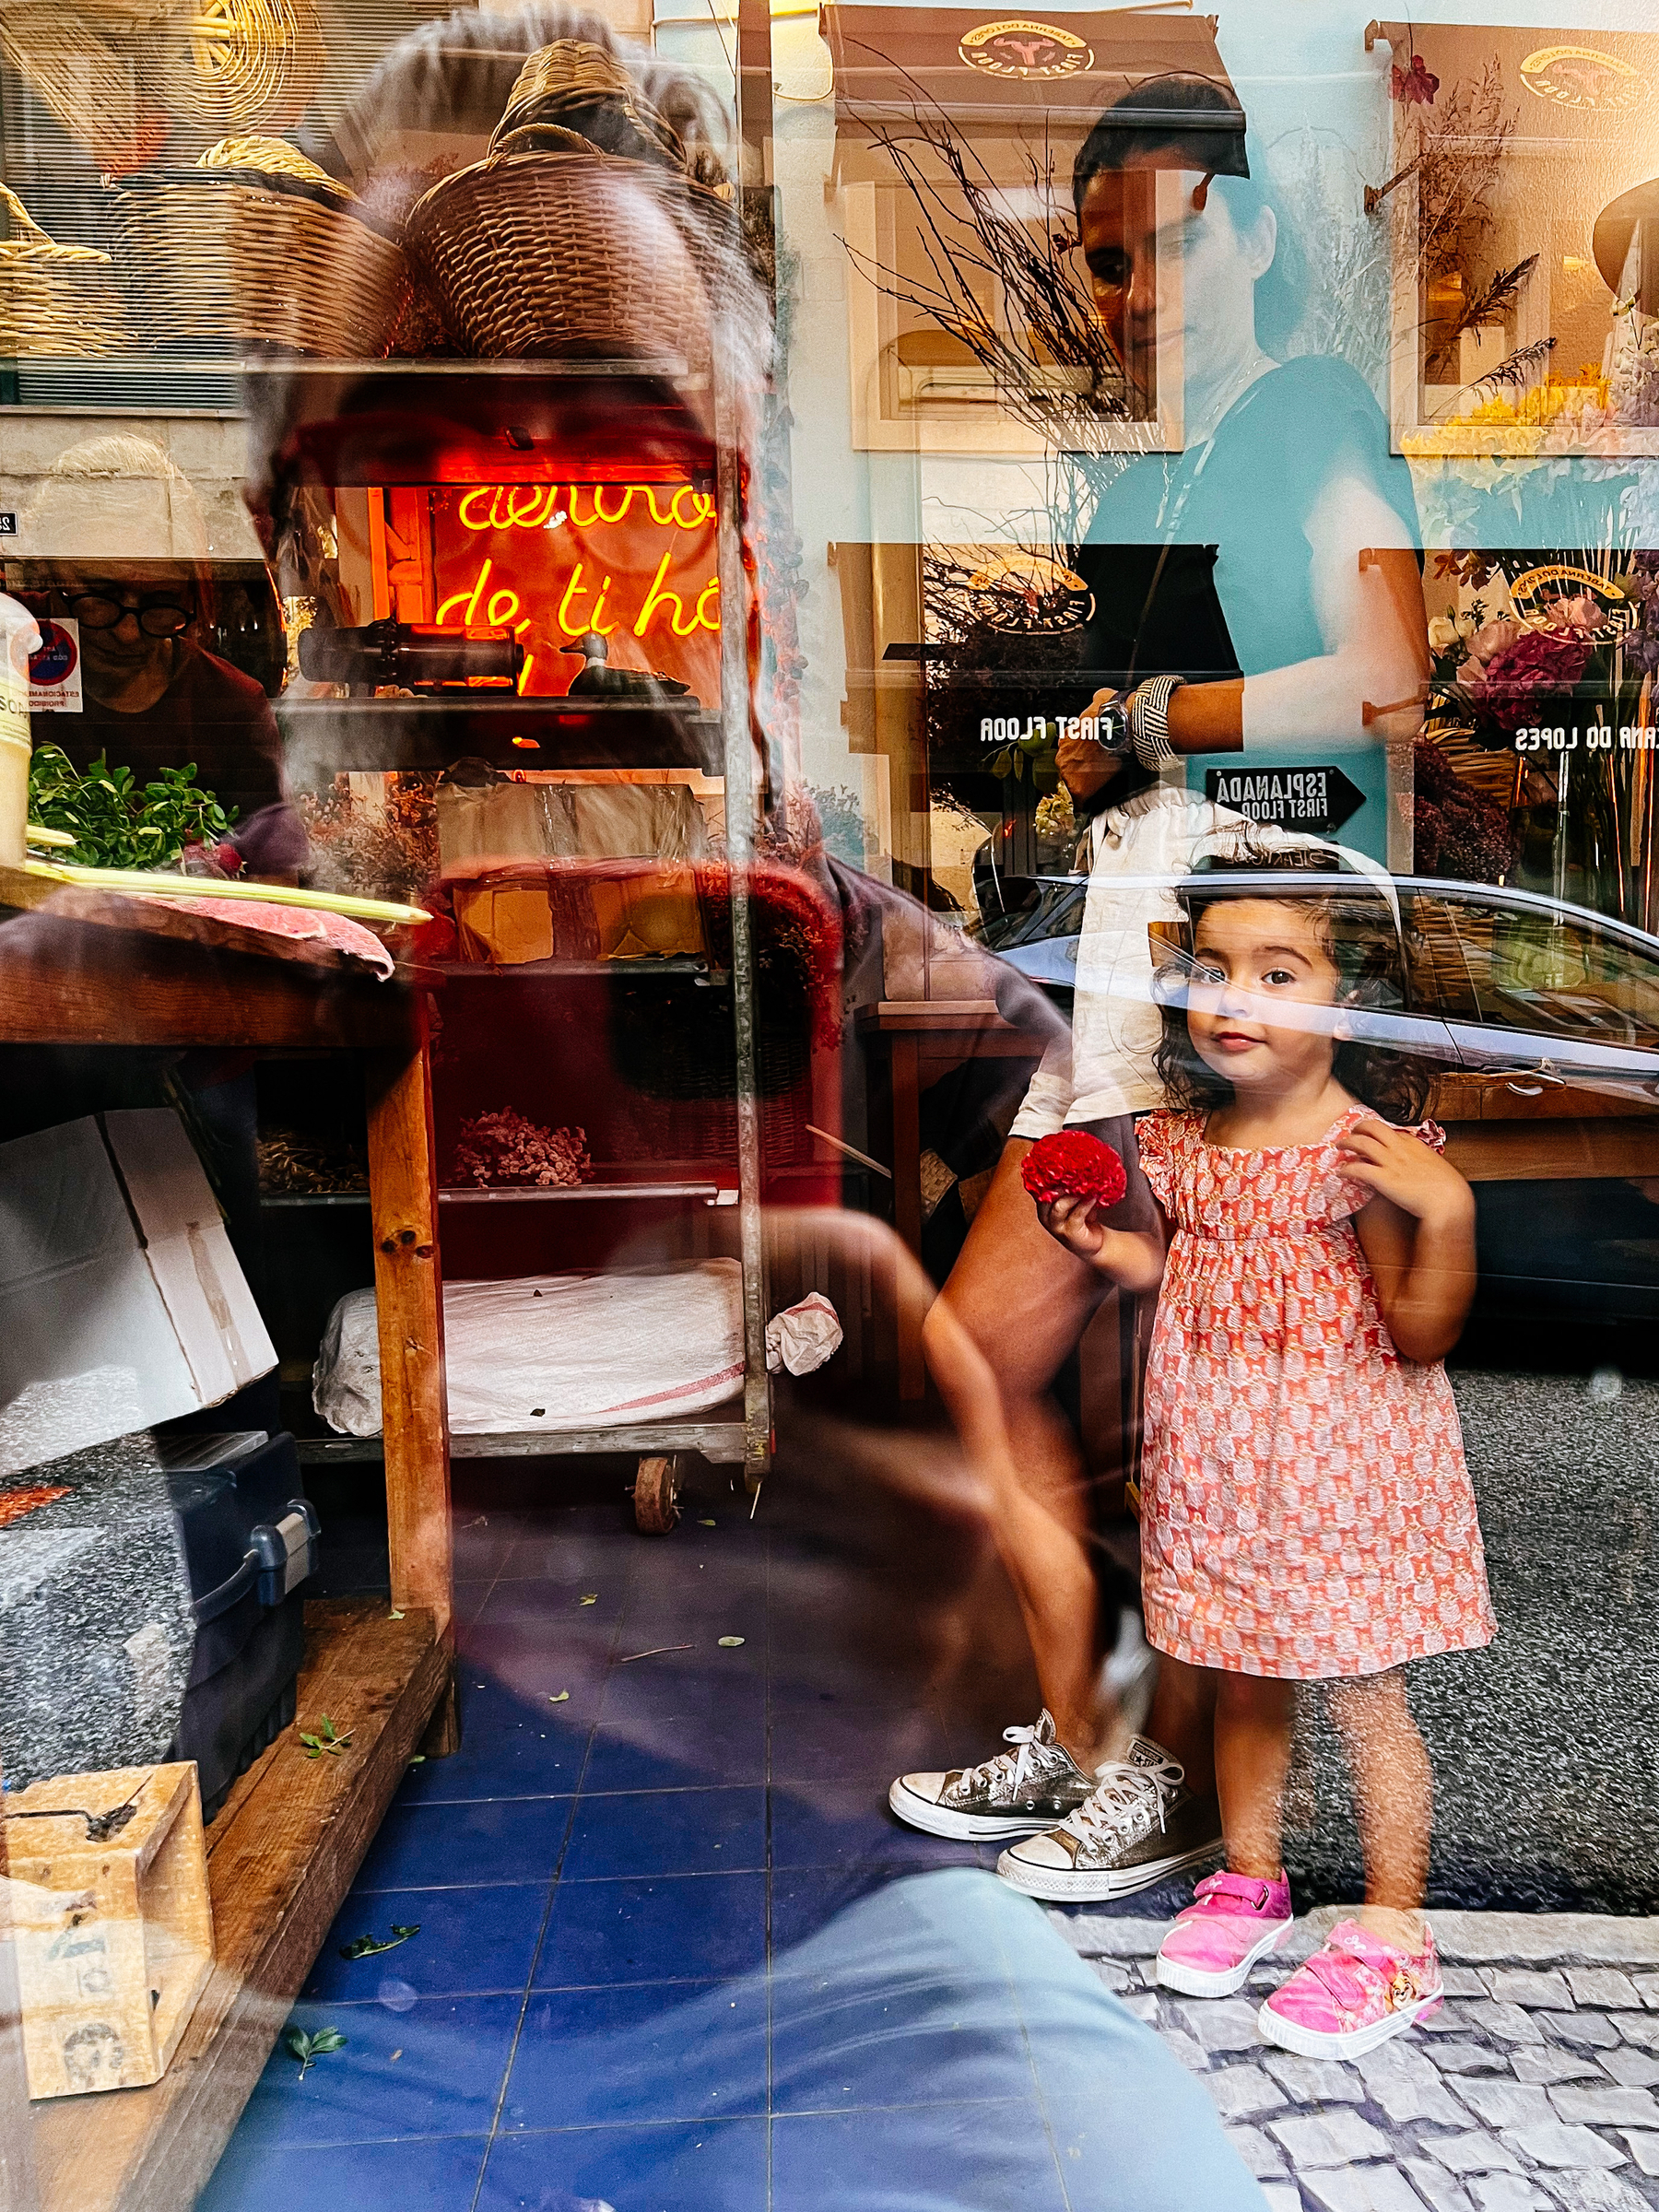 Three people in the photo. Two inside a shop, one reflected on the door window. 